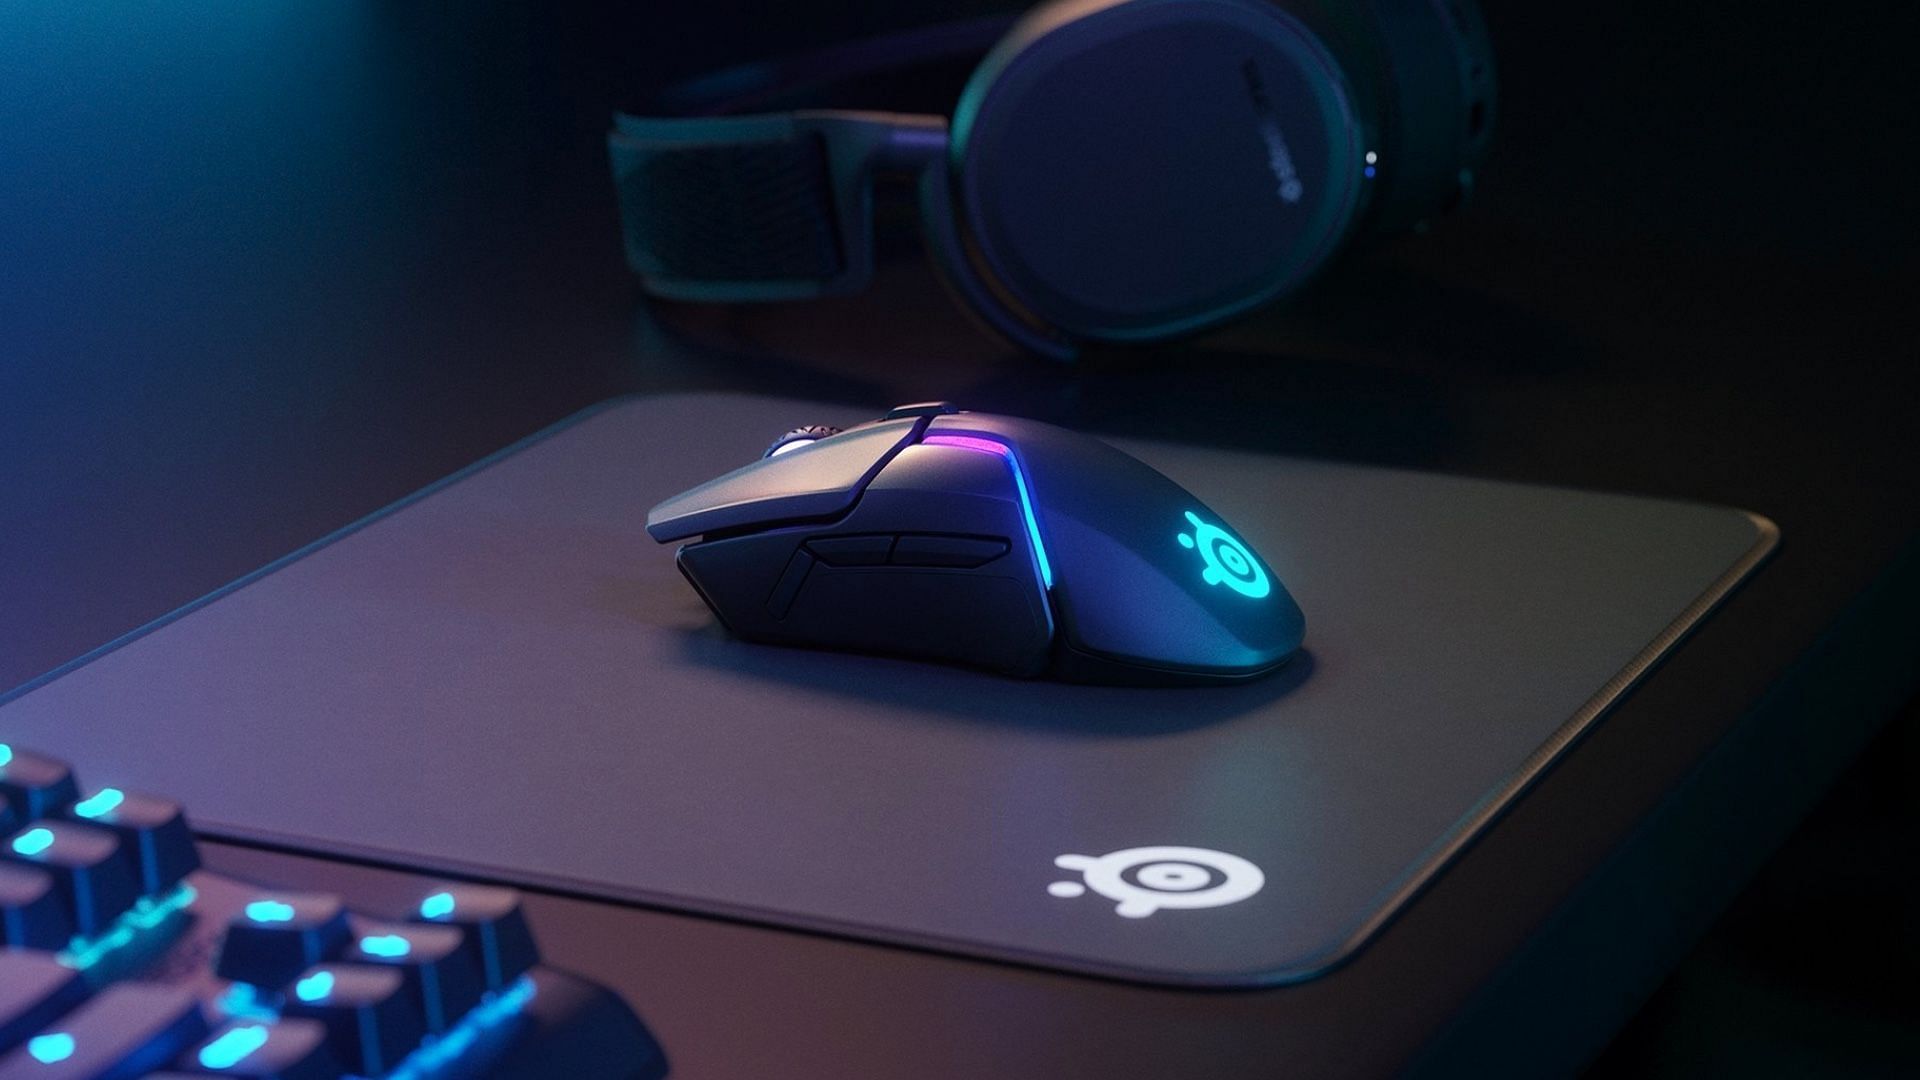 Comfortable for long gaming sessions (Image via SteelSeries)